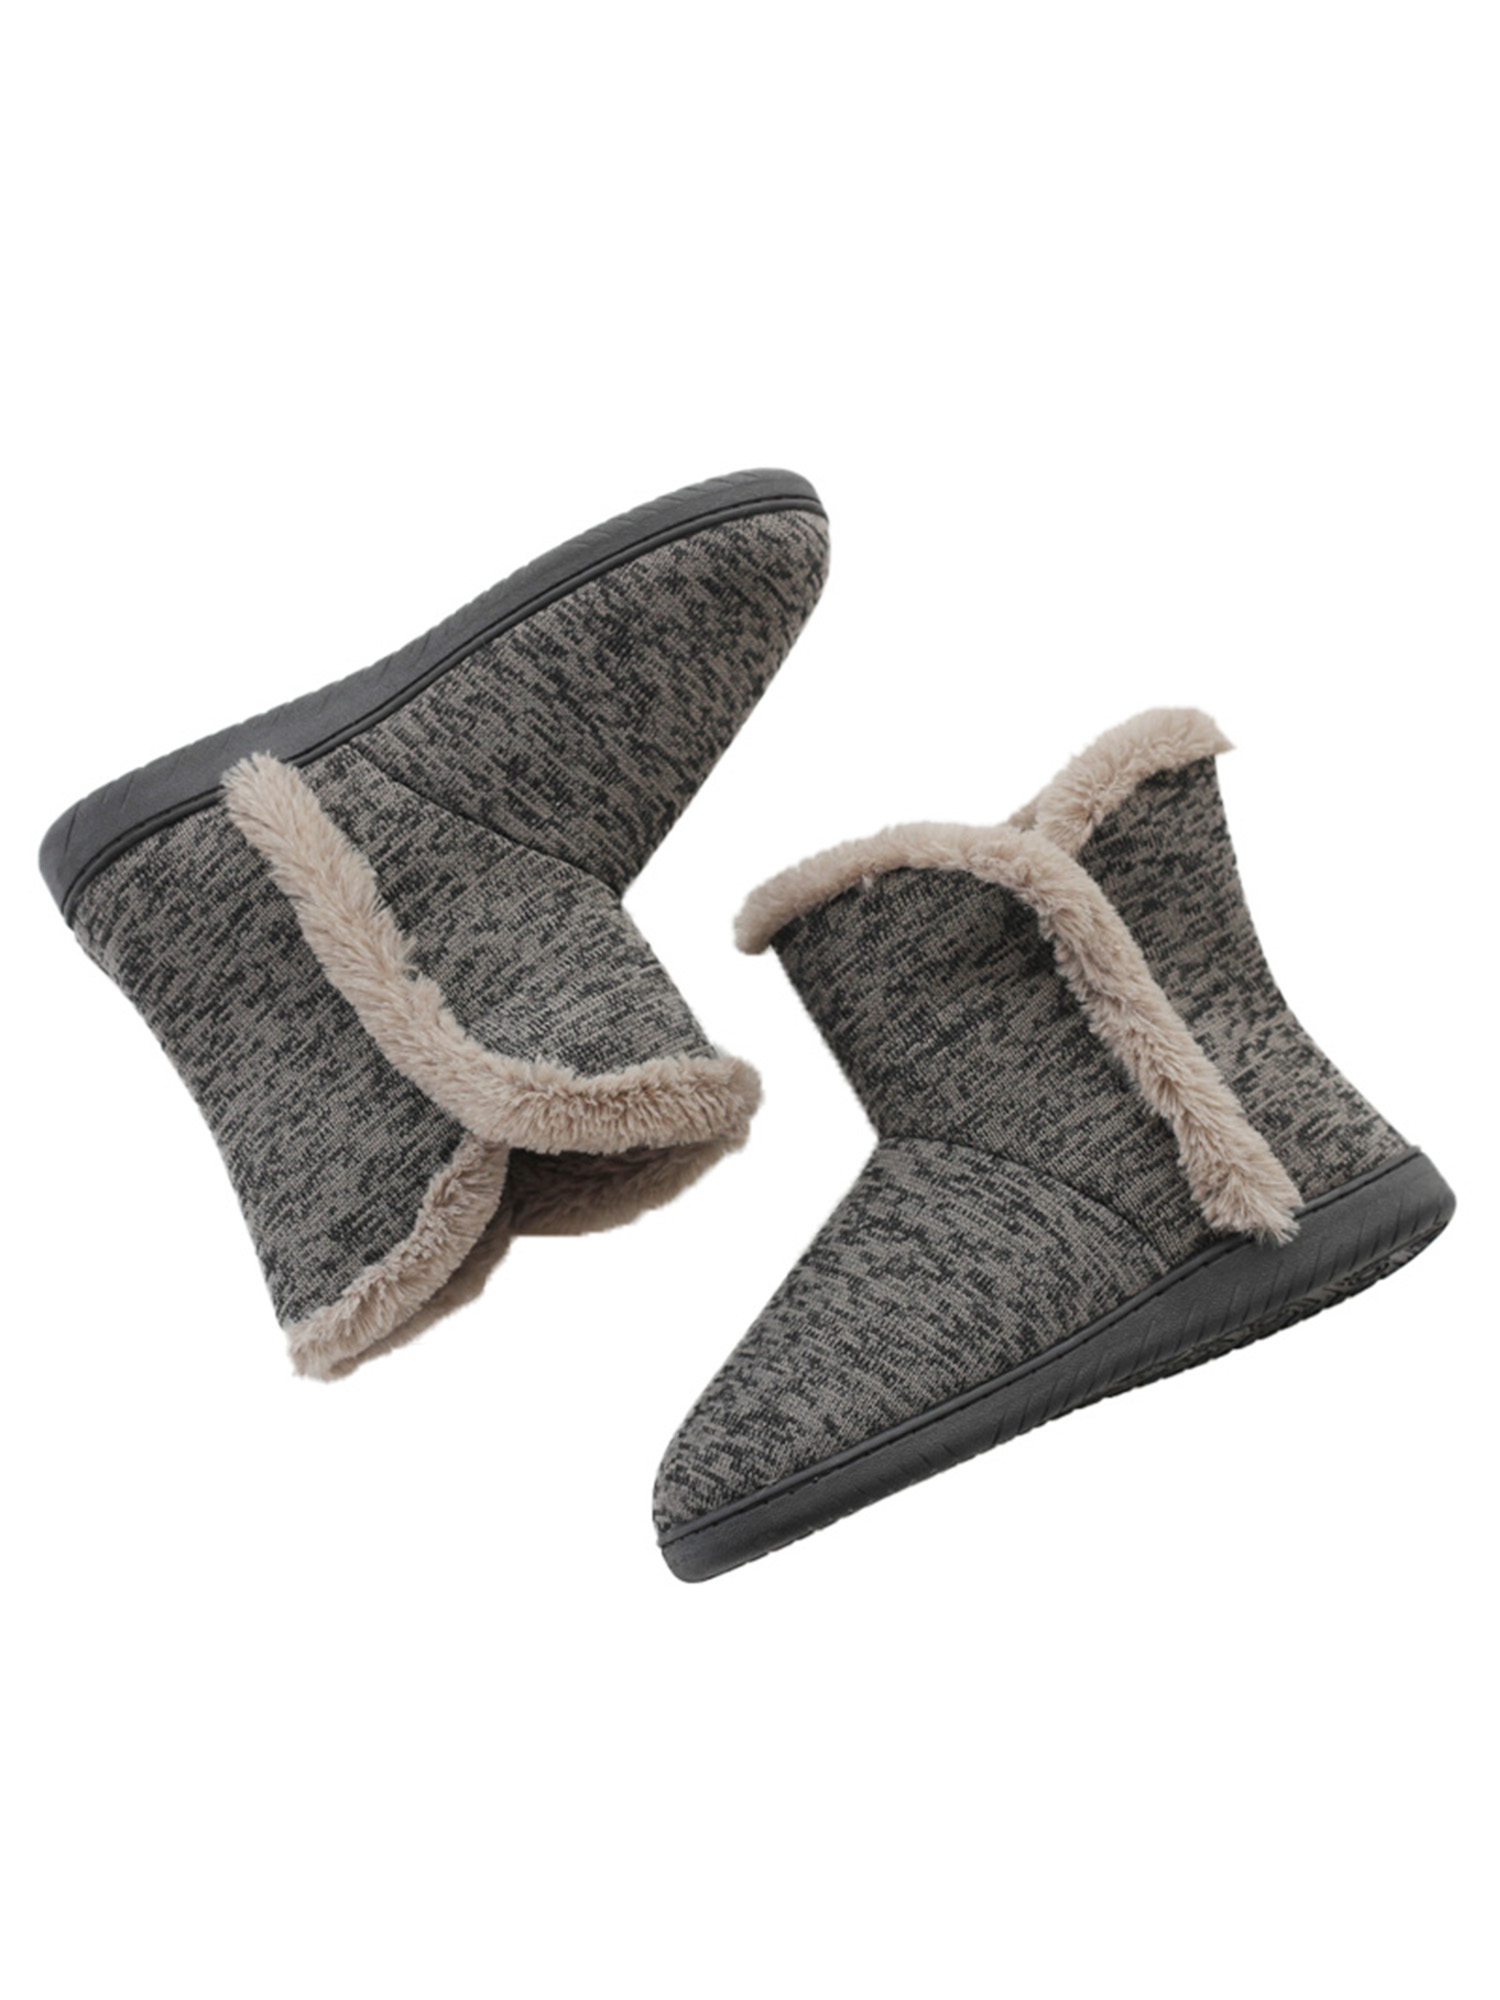 Mens House Shoes Bootie Slippers Winter Boots Plush Slip On Gray WAV4 - image 3 of 4